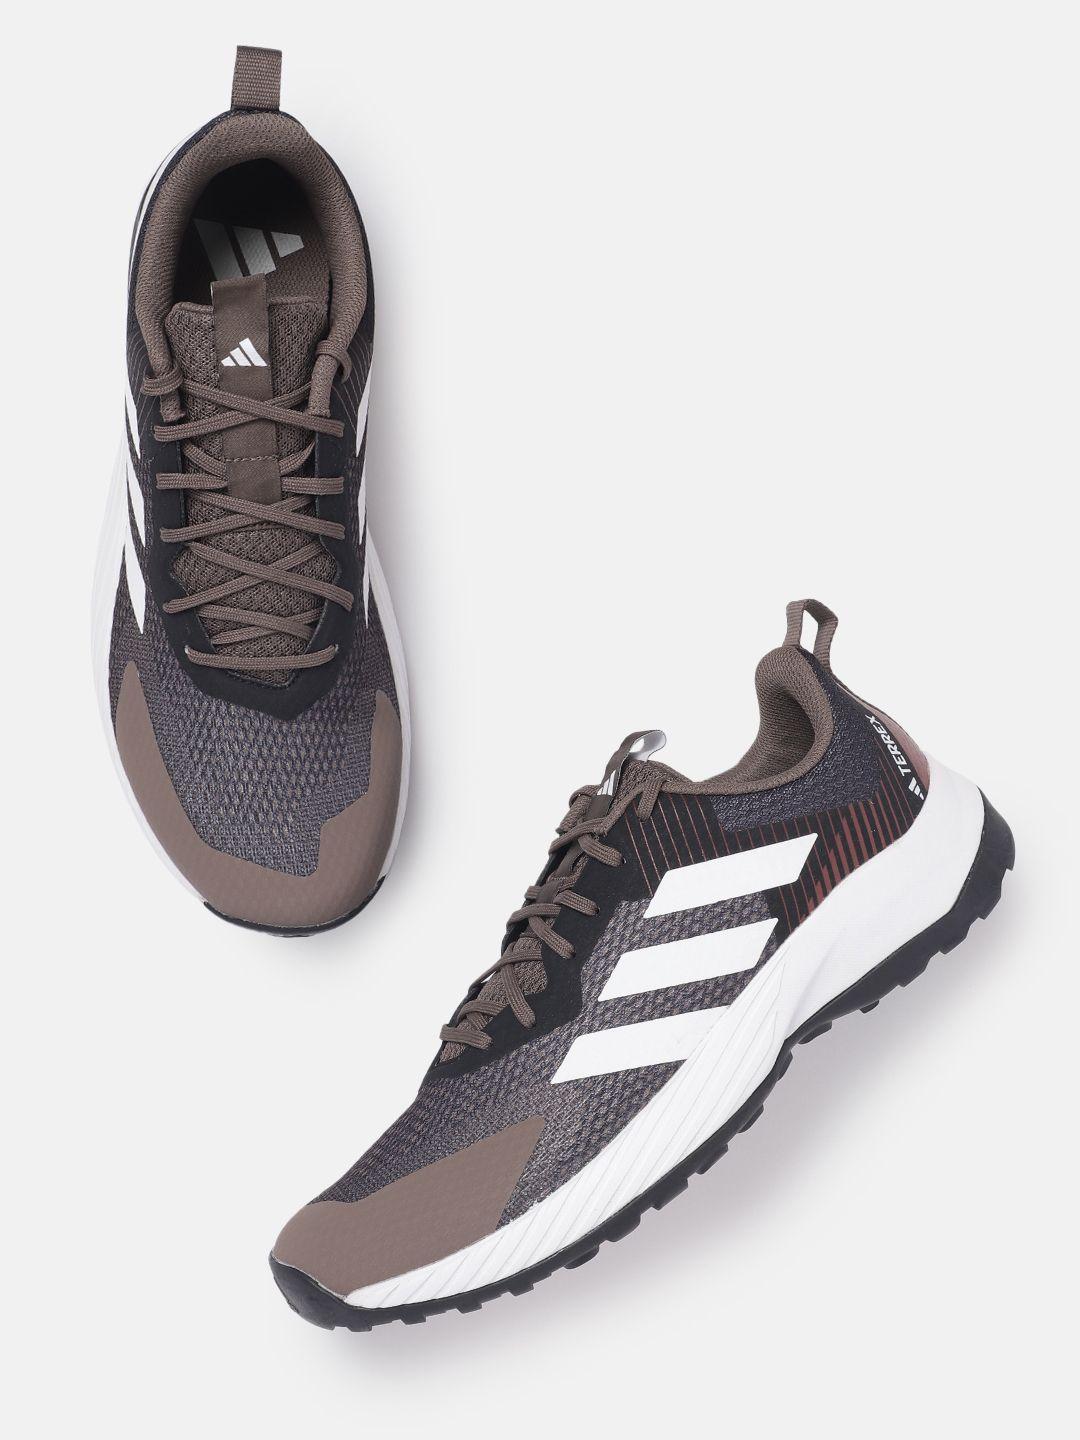 adidas men woven design glimph v2 trekking shoes with striped detail